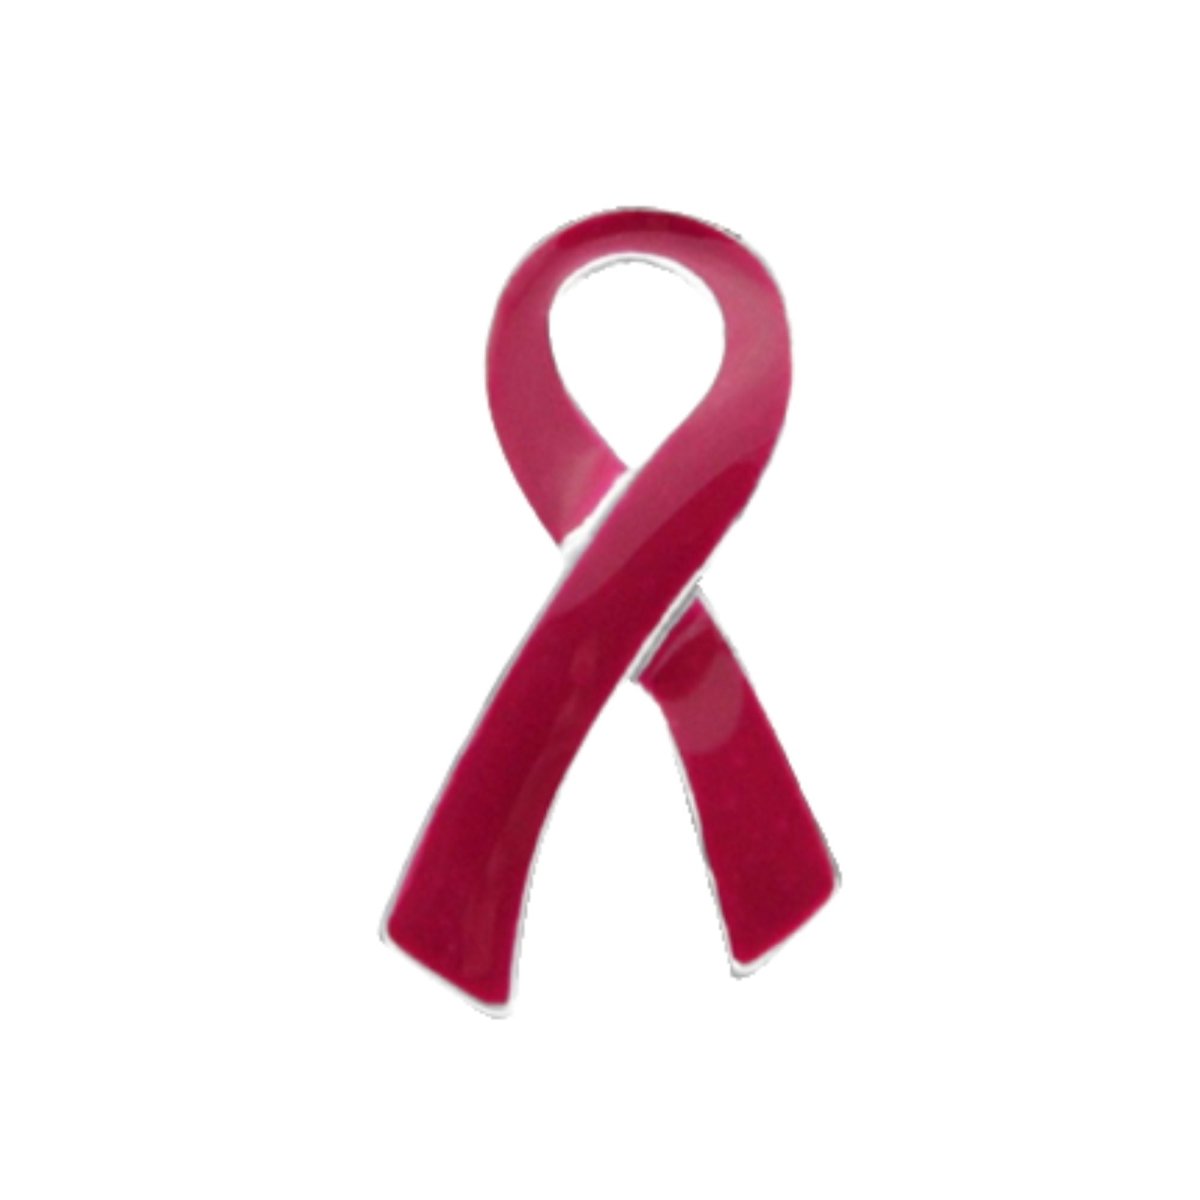 Sickle Cell Anemia Awareness Ribbon Pins - Fundraising For A Cause